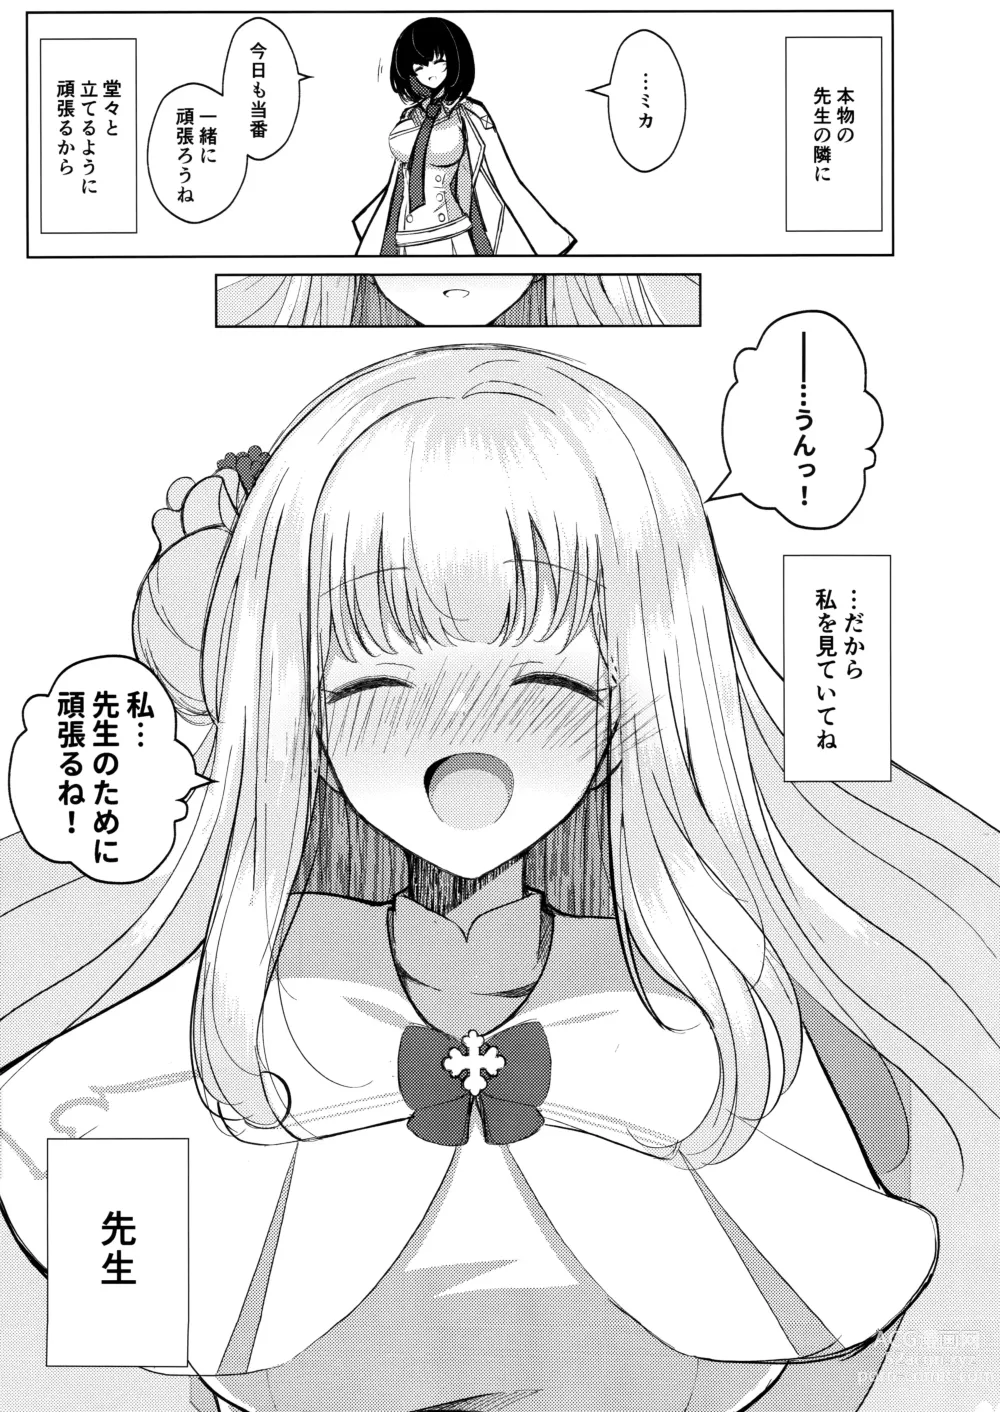 Page 16 of doujinshi Himegoto Archive